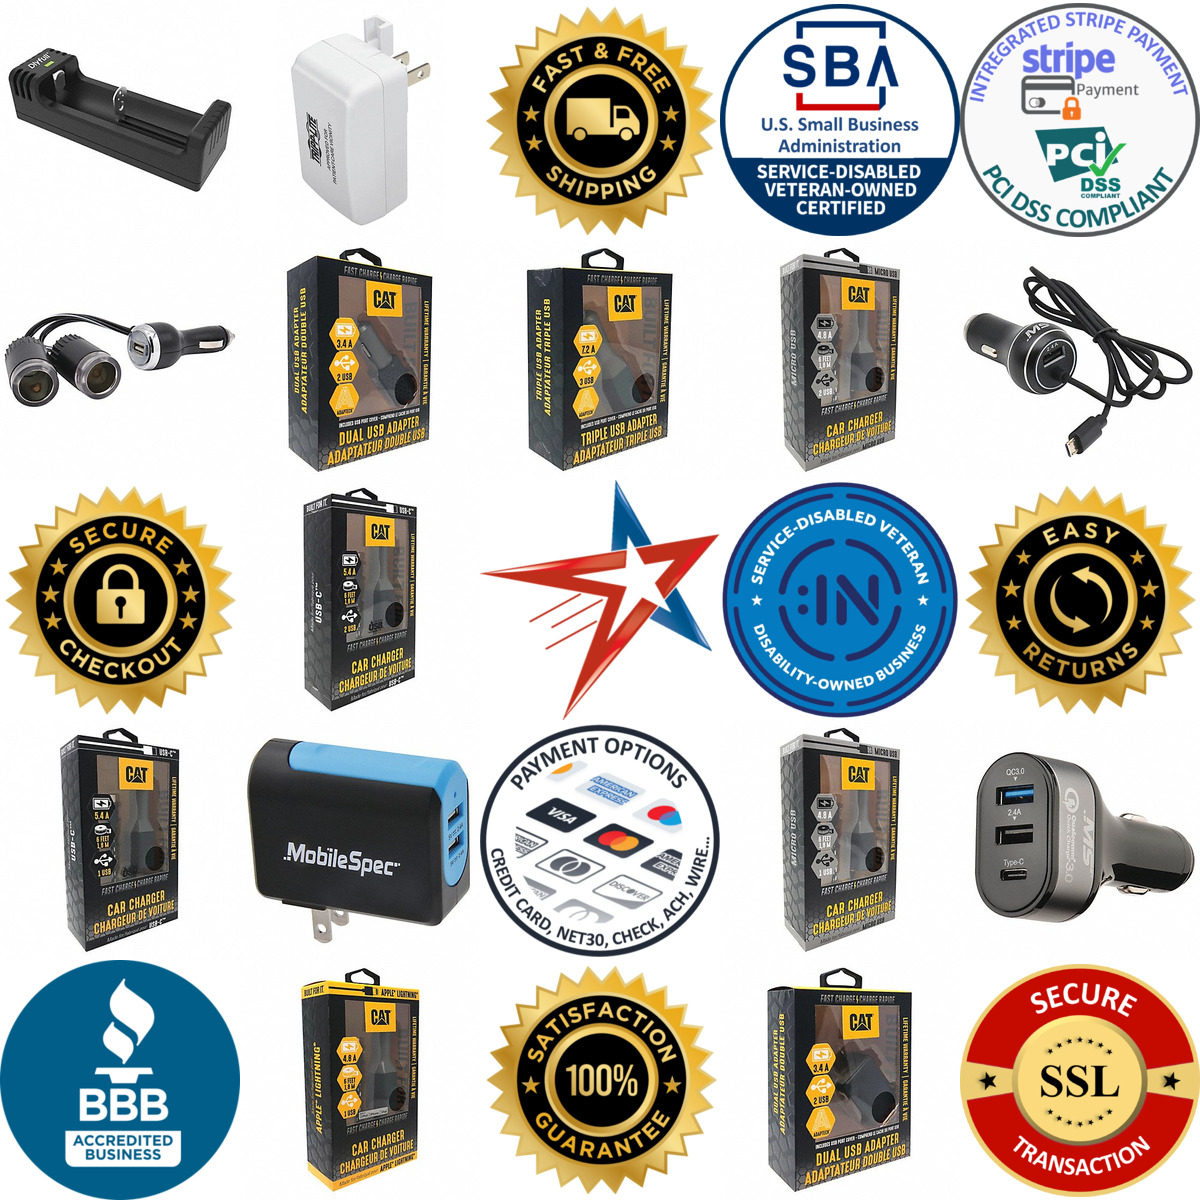 A selection of Usb Chargers products on GoVets